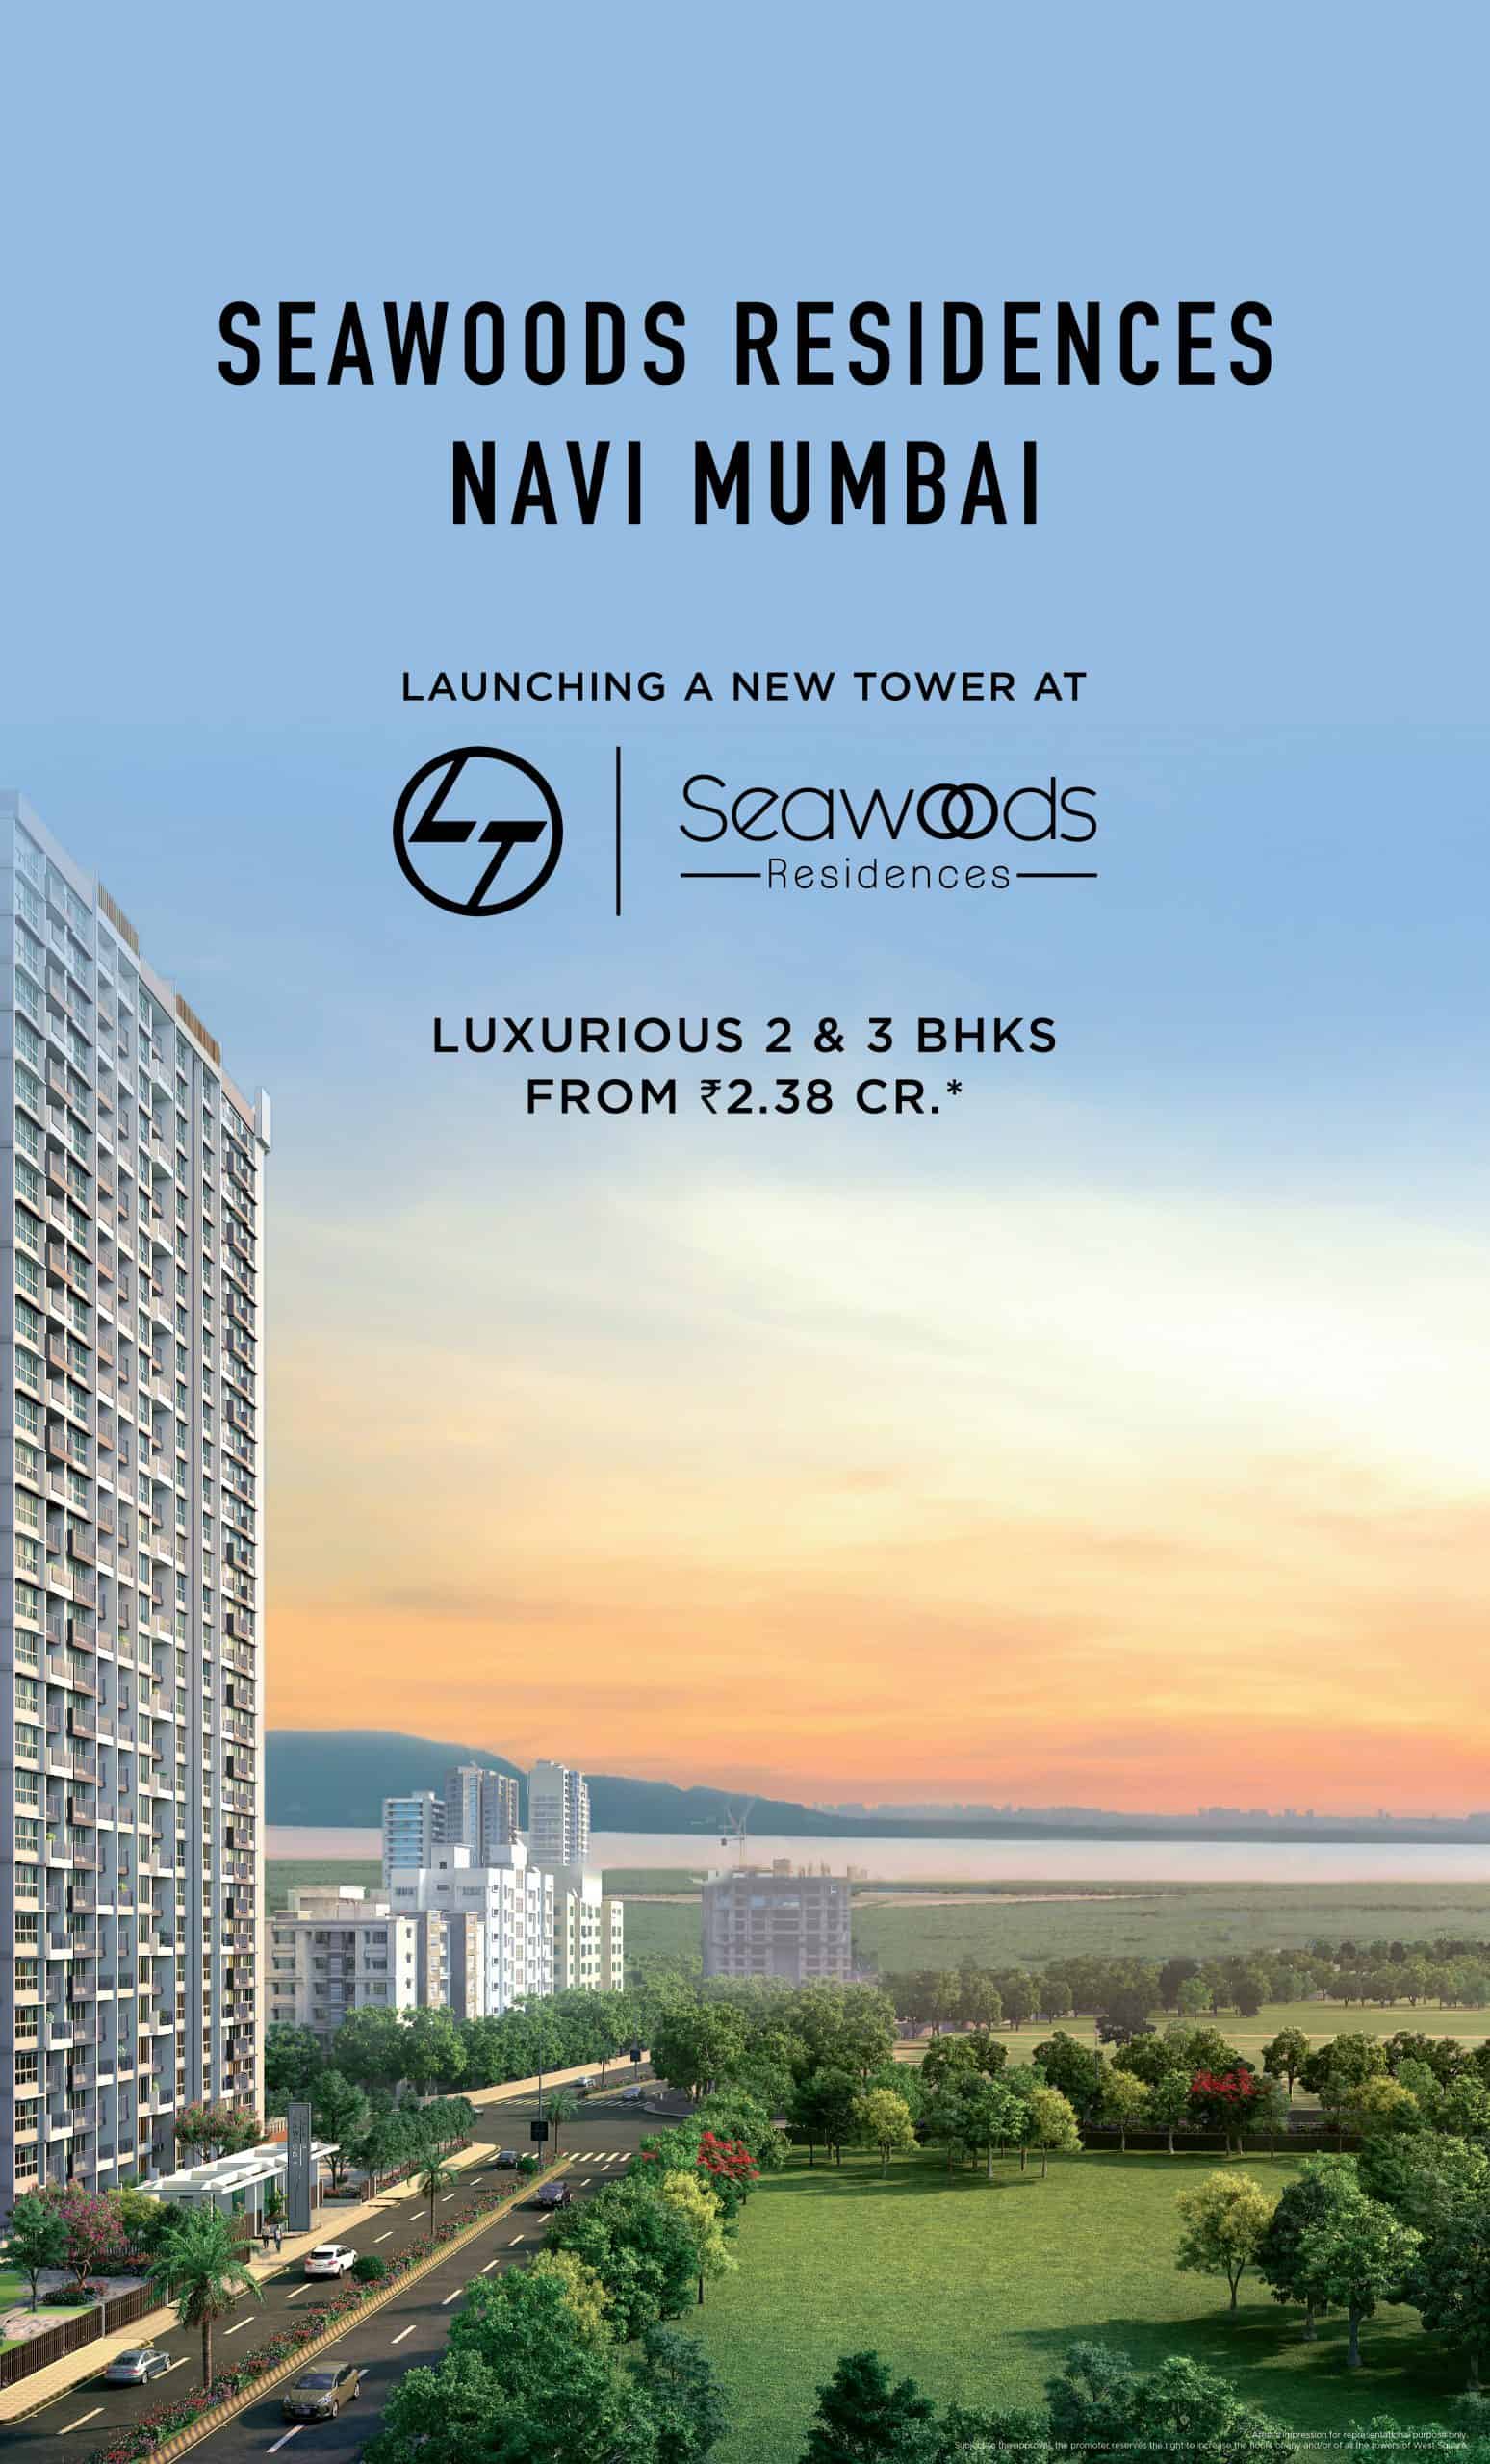 L&T Seawoods Residences - Launching a new Tower - mobile masthead